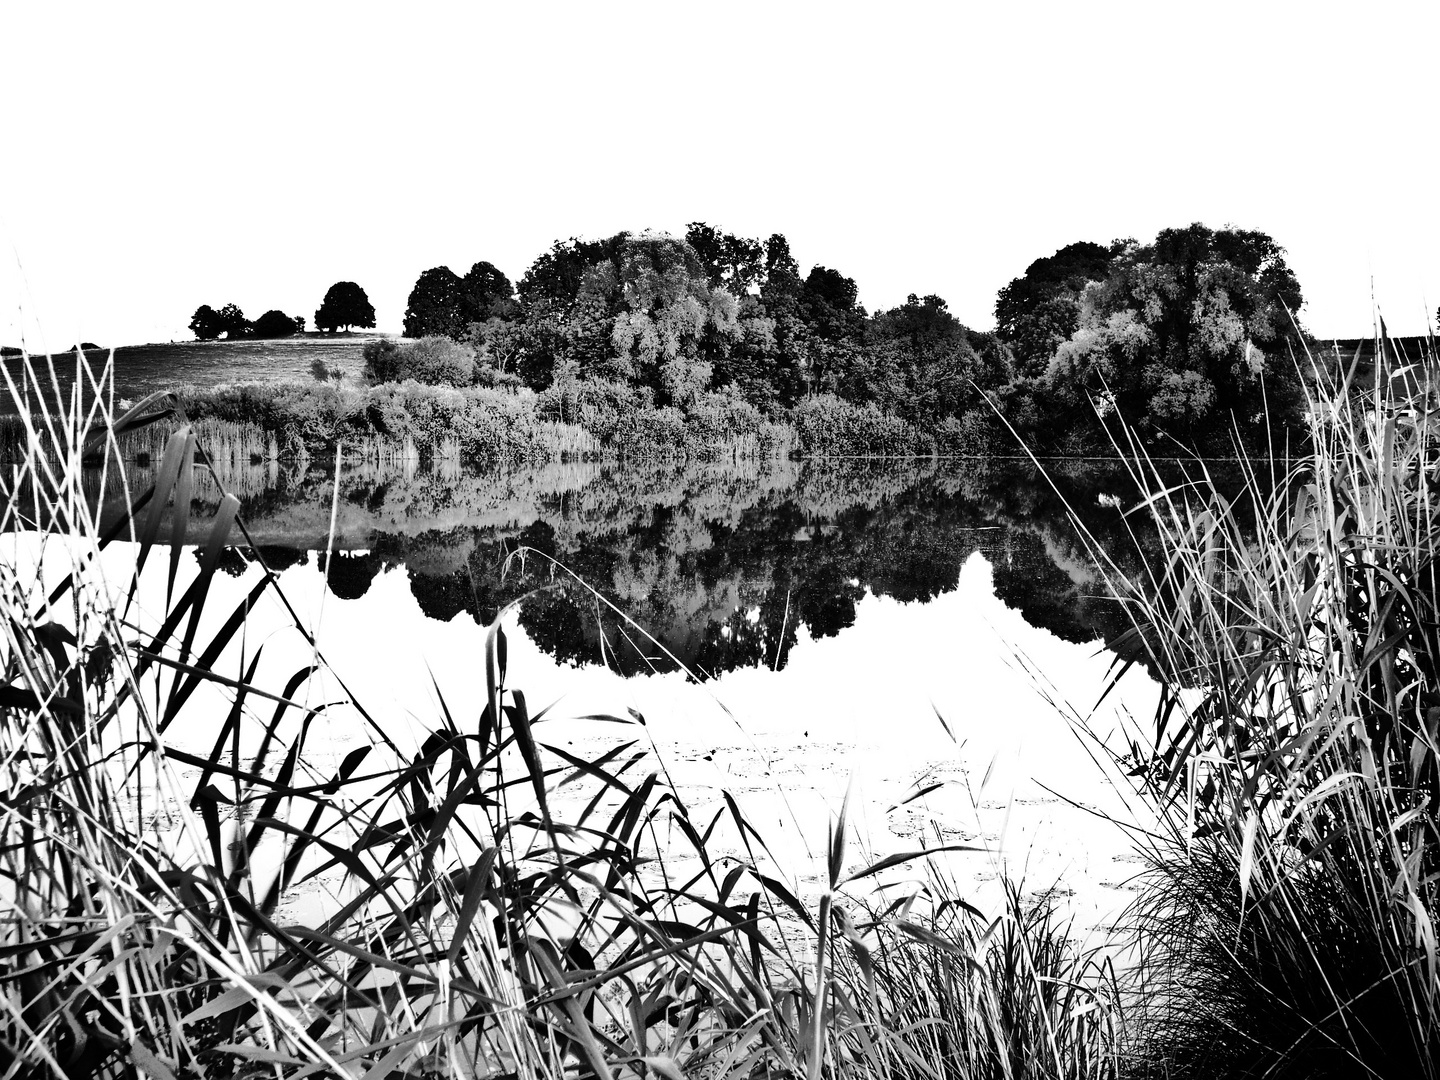 "black and white reflection"